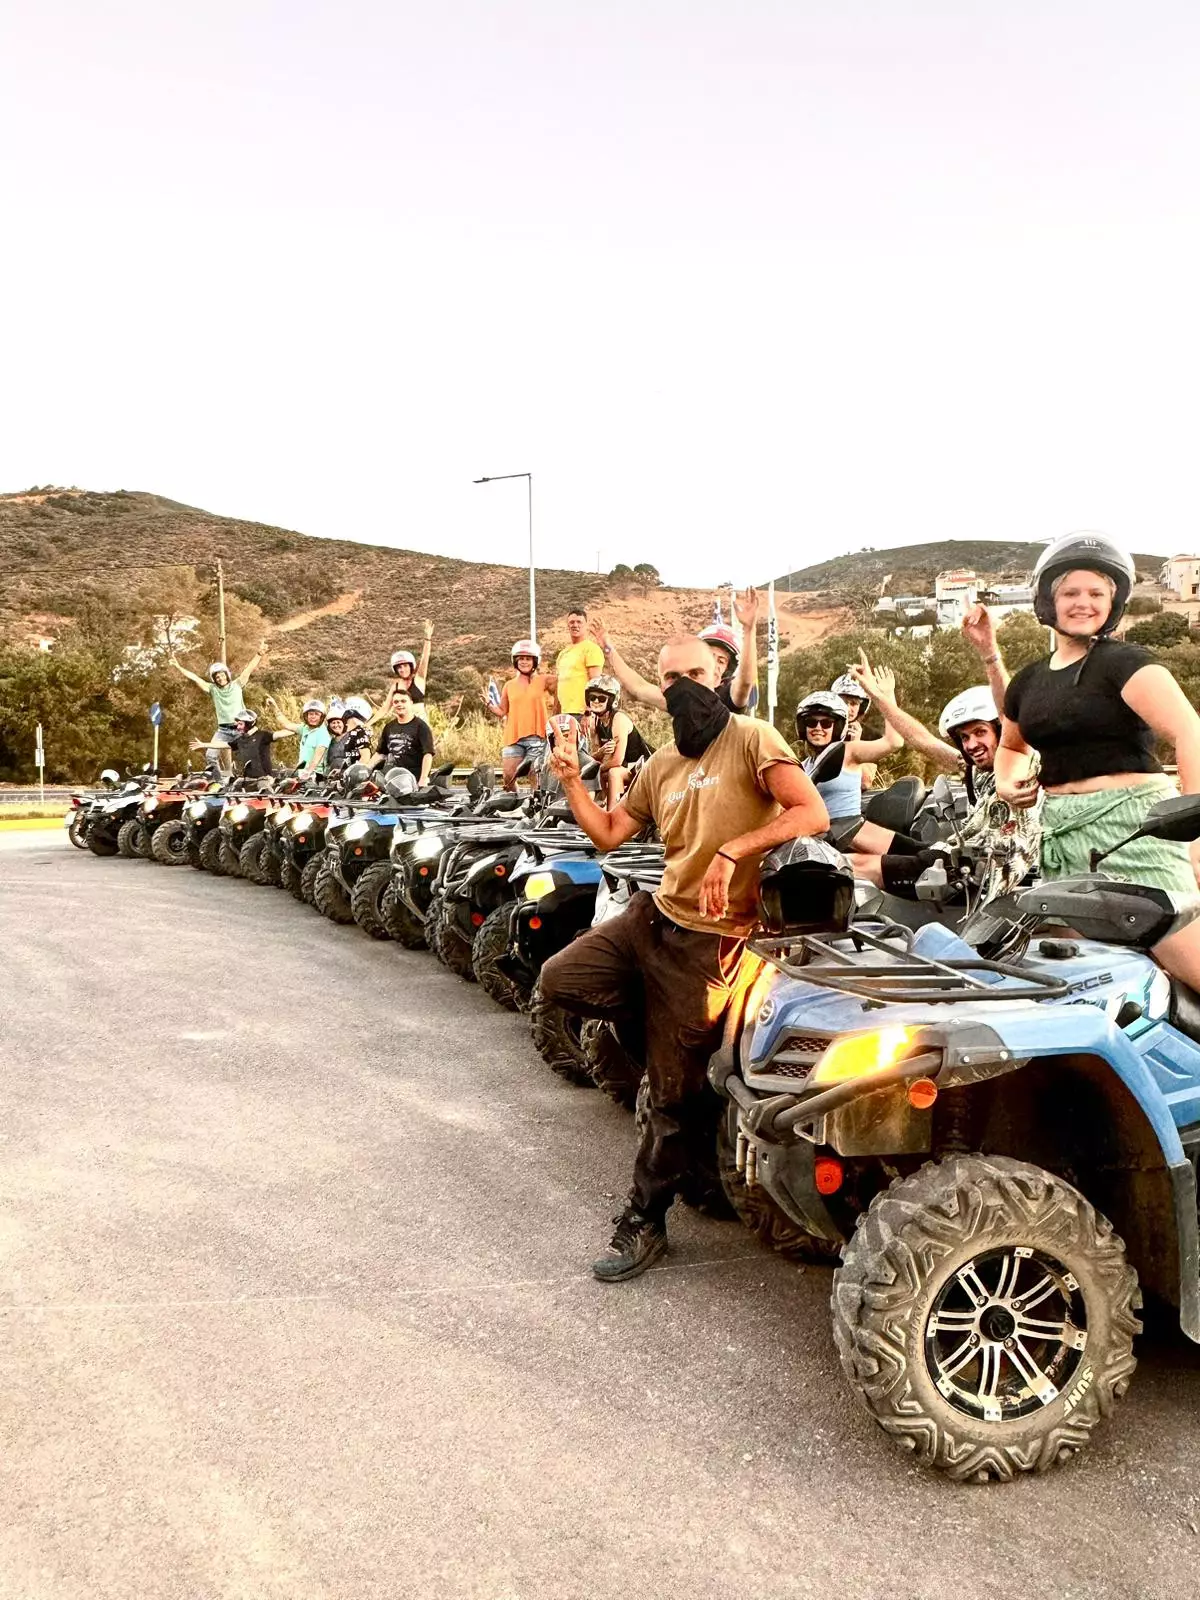 A day in the life of a tour guide at Ela Quad Safari in Kreta